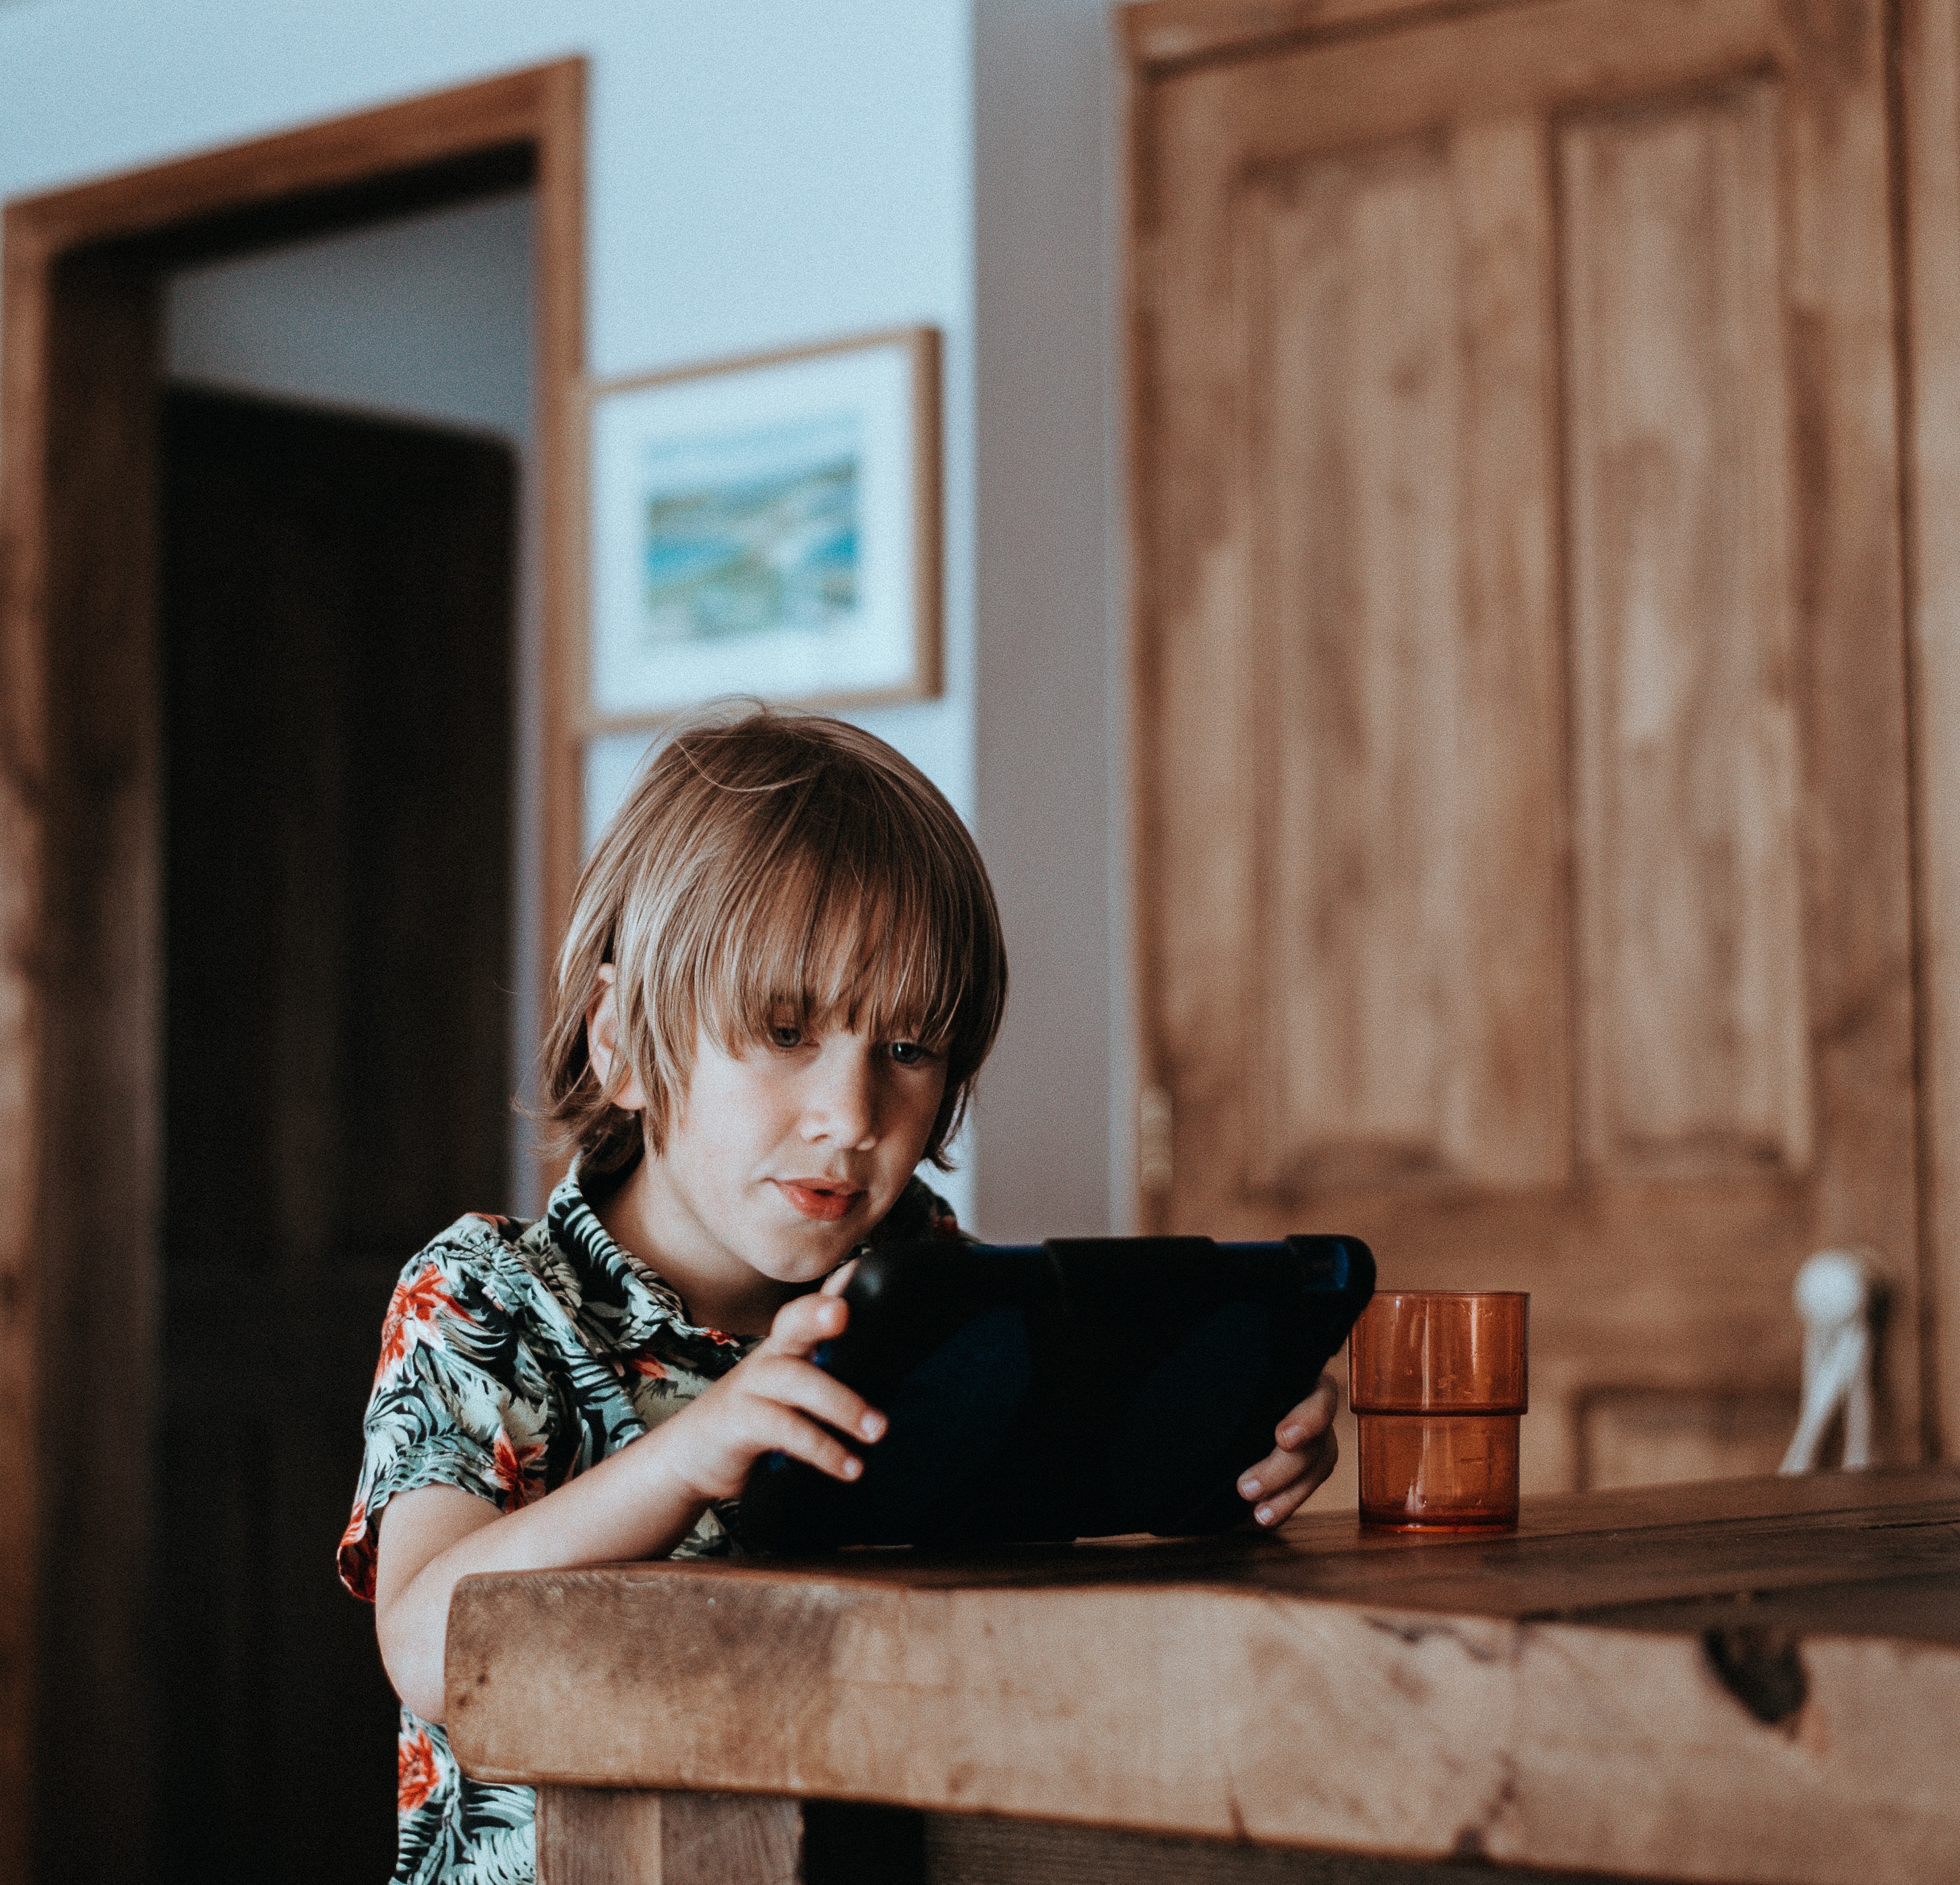 As children spend more time watching screens at home and are required to use more tablets and laptops at school, there is a growing concern about the potential long-term harm being done to their visual development. 